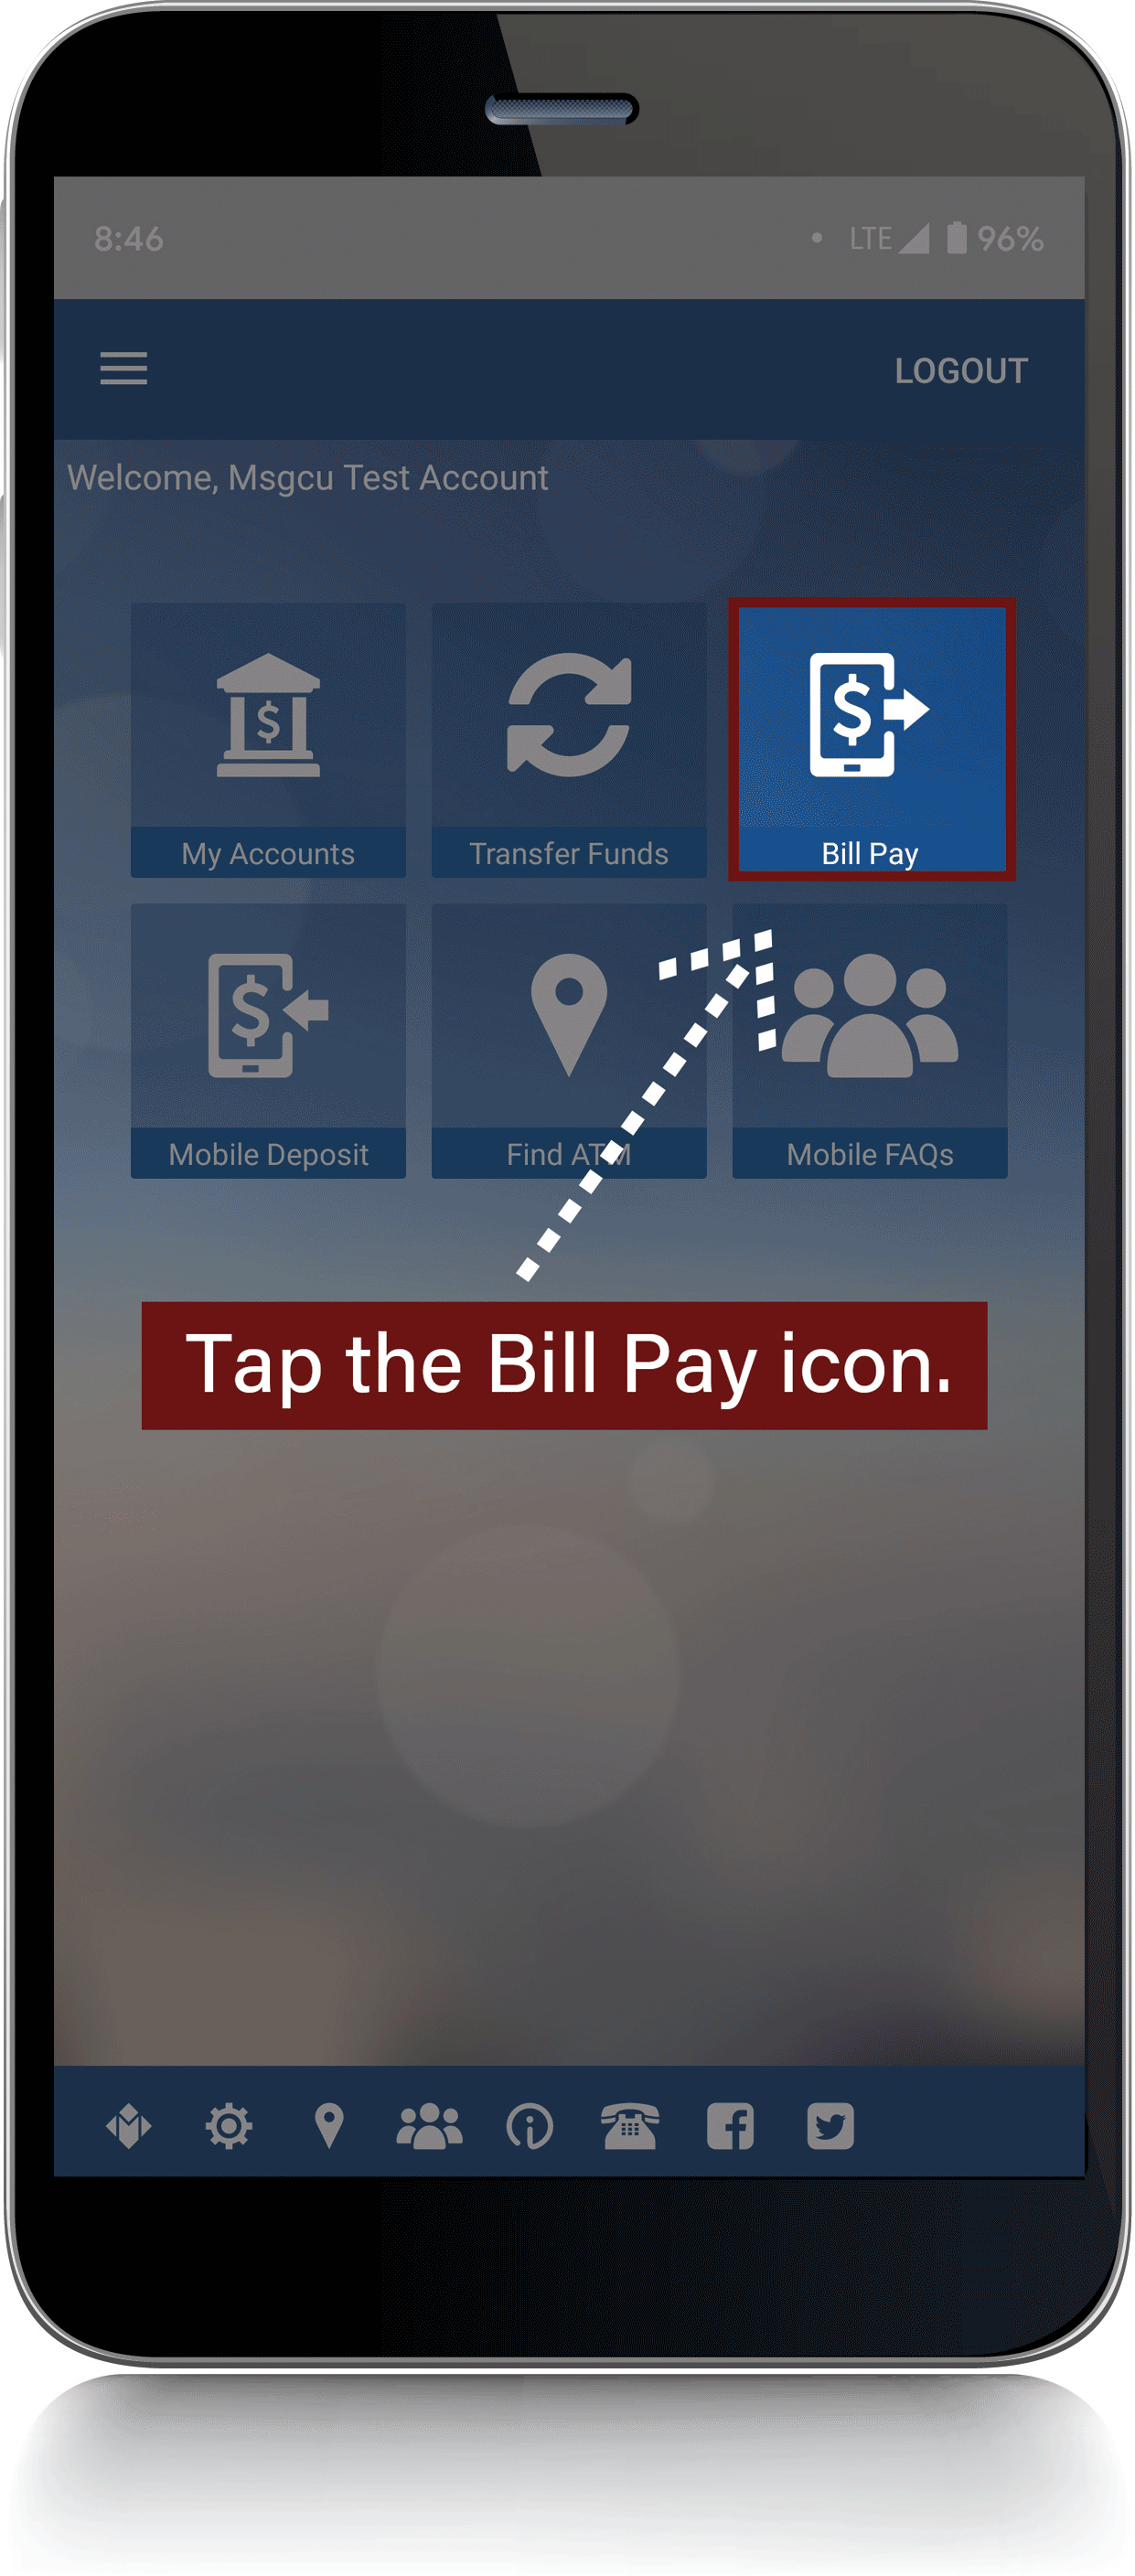 Steps for Bill Pay from a mobile device